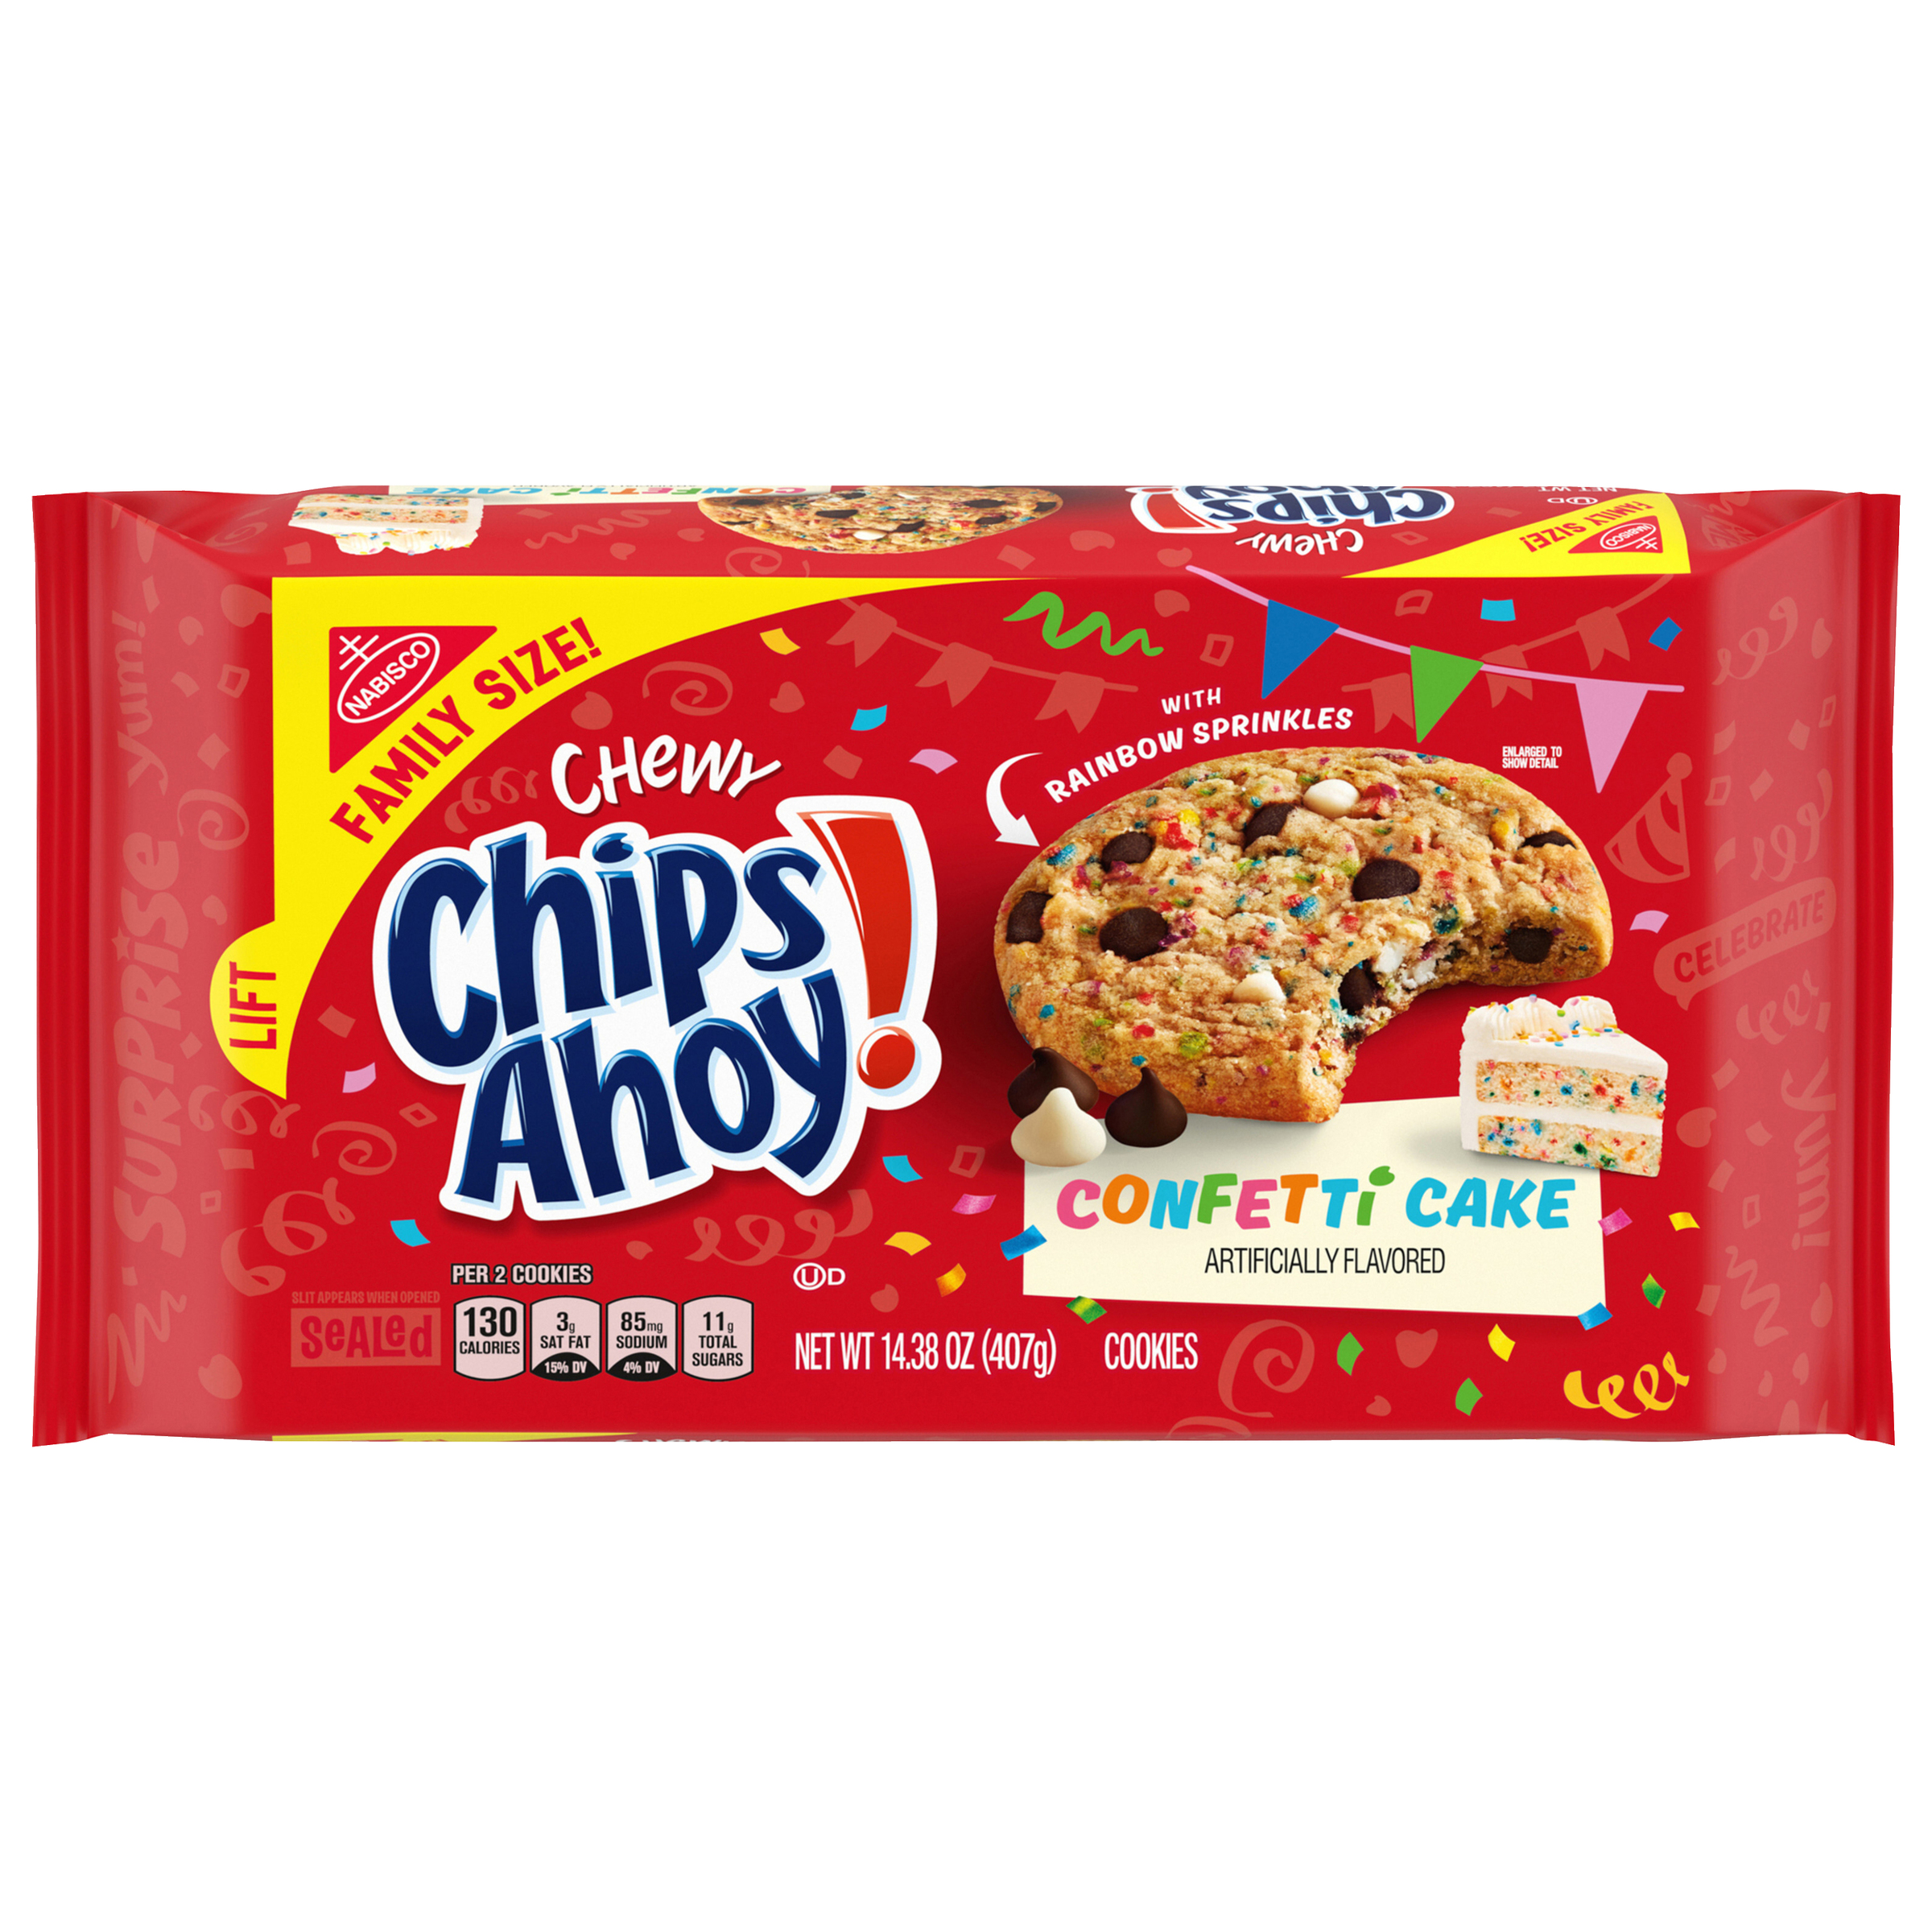 CHIPS AHOY! Chewy Confetti Cake Chocolate Chip Cookies with Rainbow Sprinkles, Birthday Cookies, Family Size, 14.38 oz-0